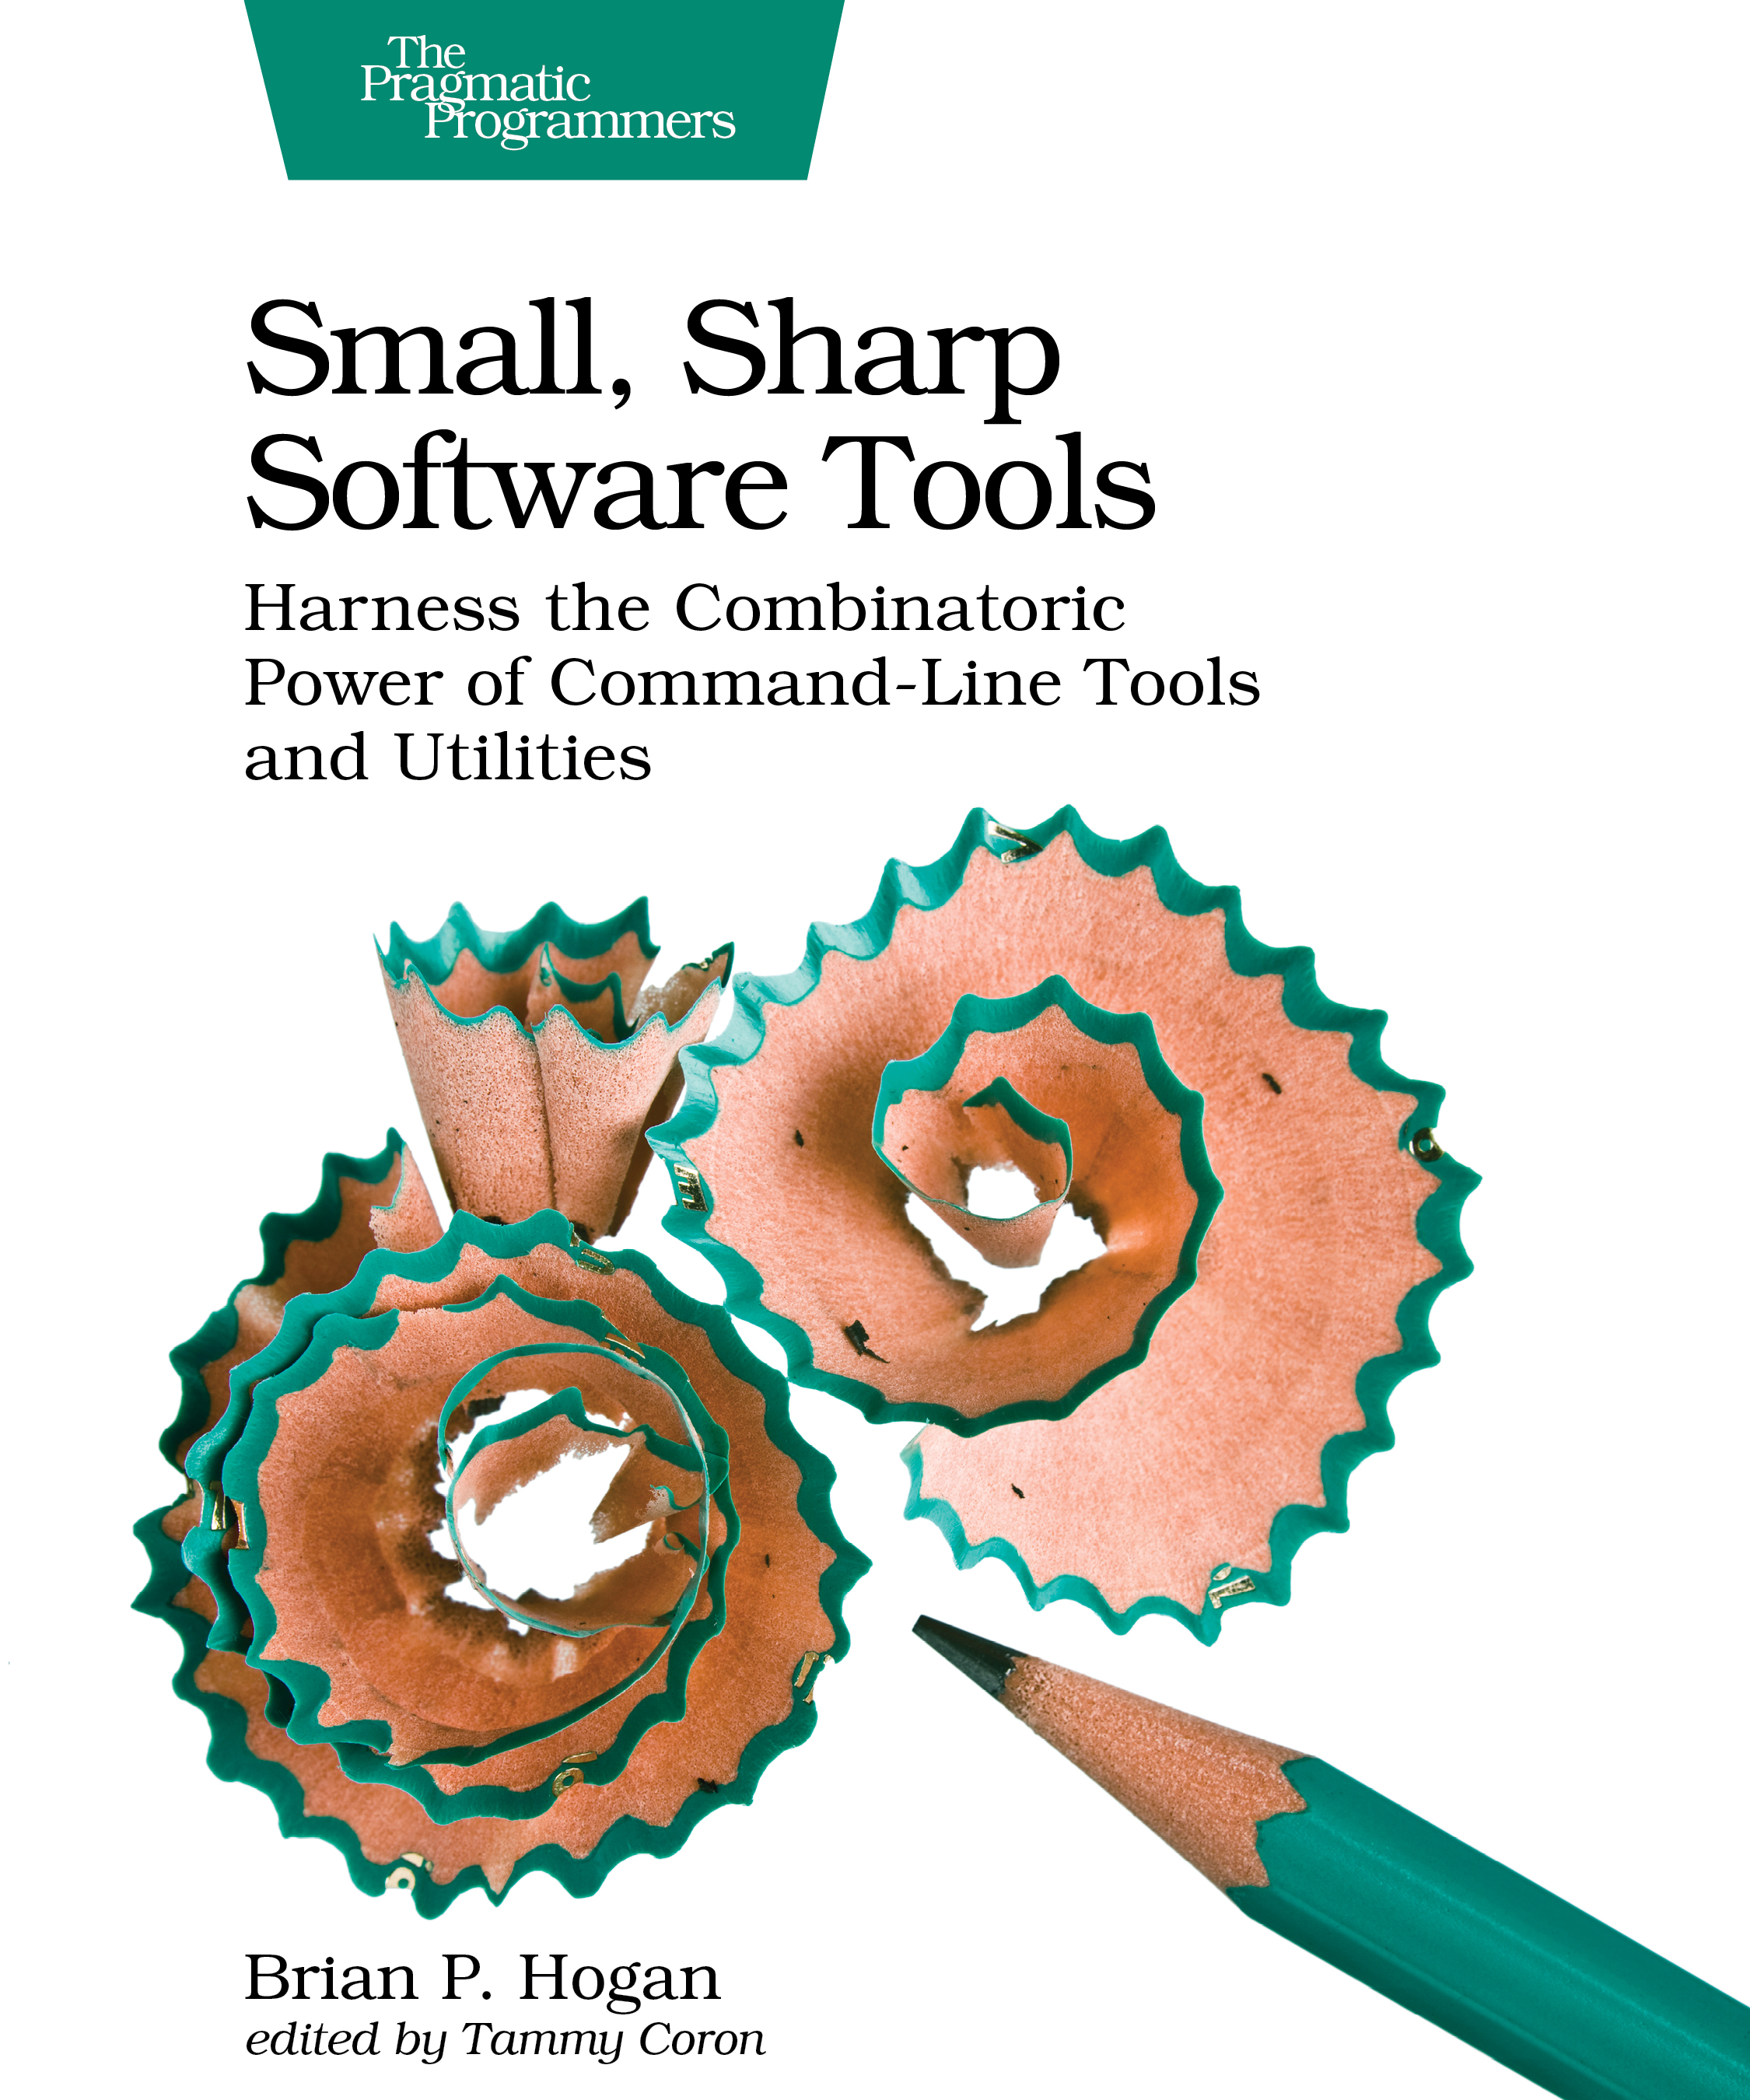 Small, Sharp Software Tools: Harness the Combinatoric Power of